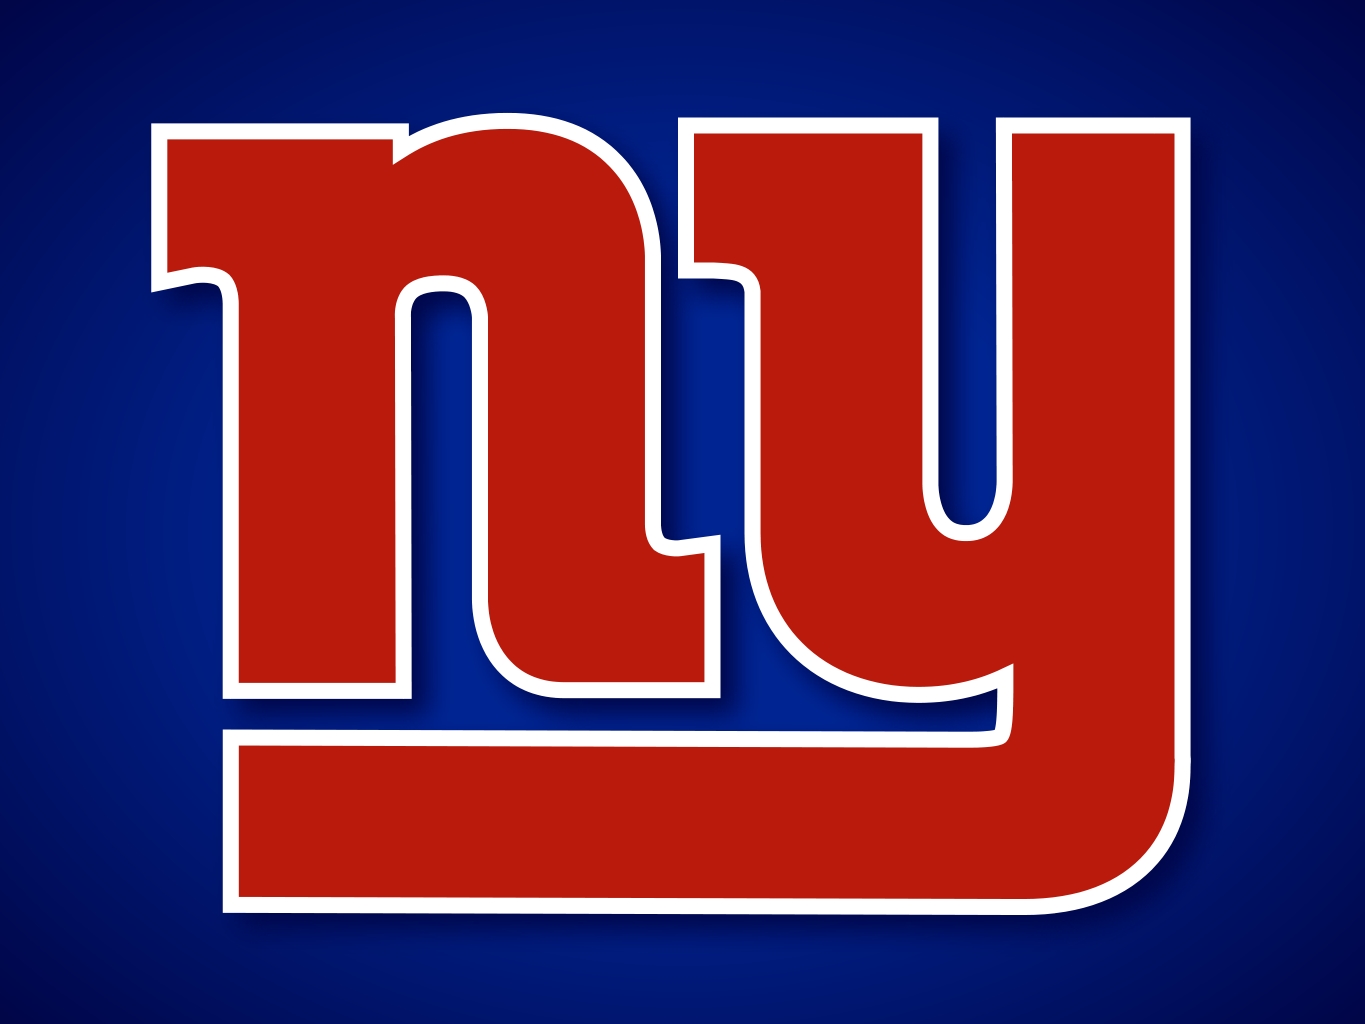  wallpaper of the month New York Giants New York Giants wallpapers 1365x1024